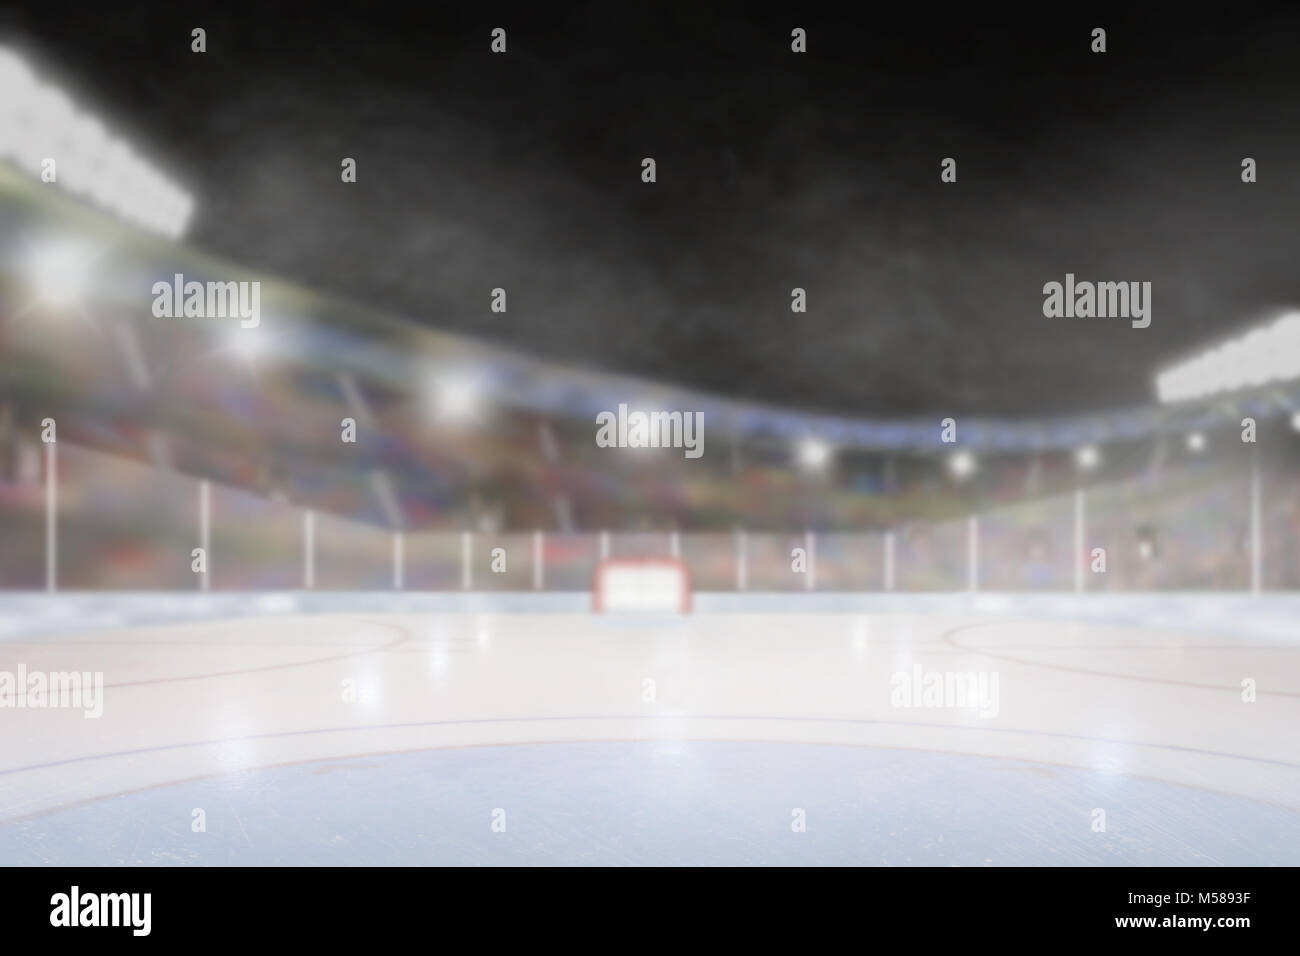 Brightly lit outdoor ice hockey rink arena with focus on foreground and shallow depth of field on background. Deliberate lens flare and copy space. Stock Photo